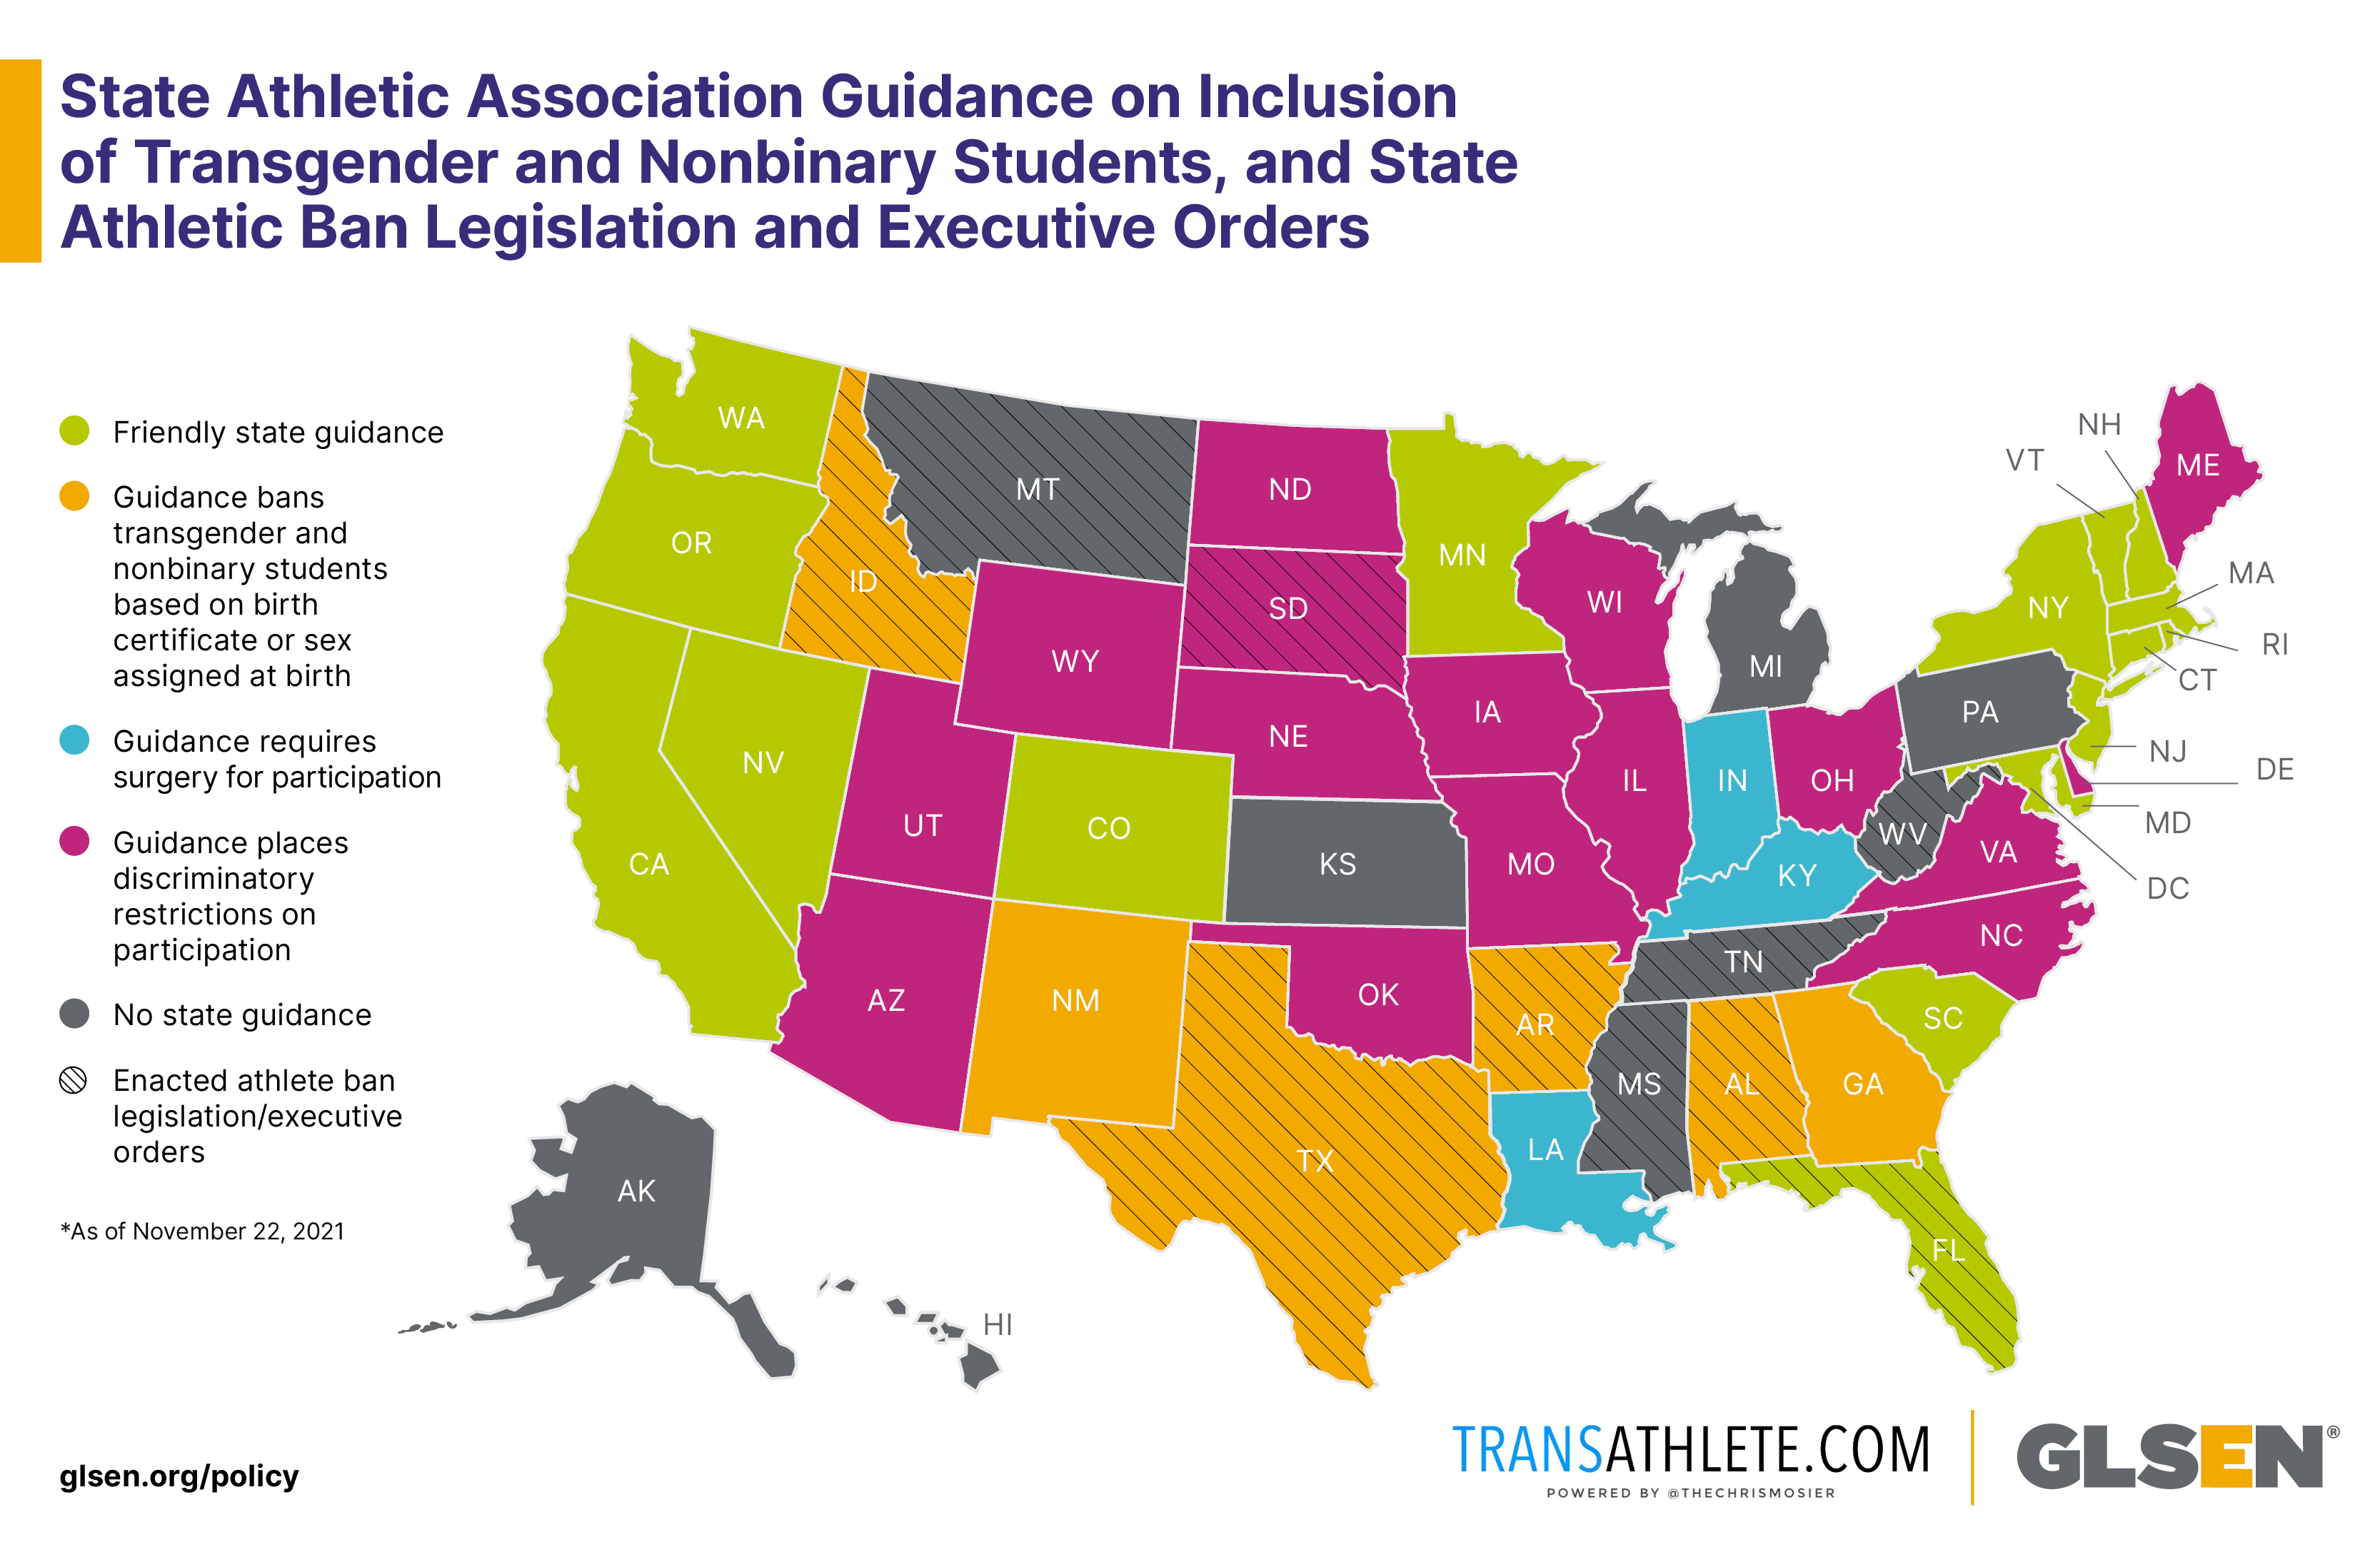 State Athletic Association Guidance on Inclusion of Transgender and Nonbinary Students & State Athletic Ban Legislation or Executive Orders